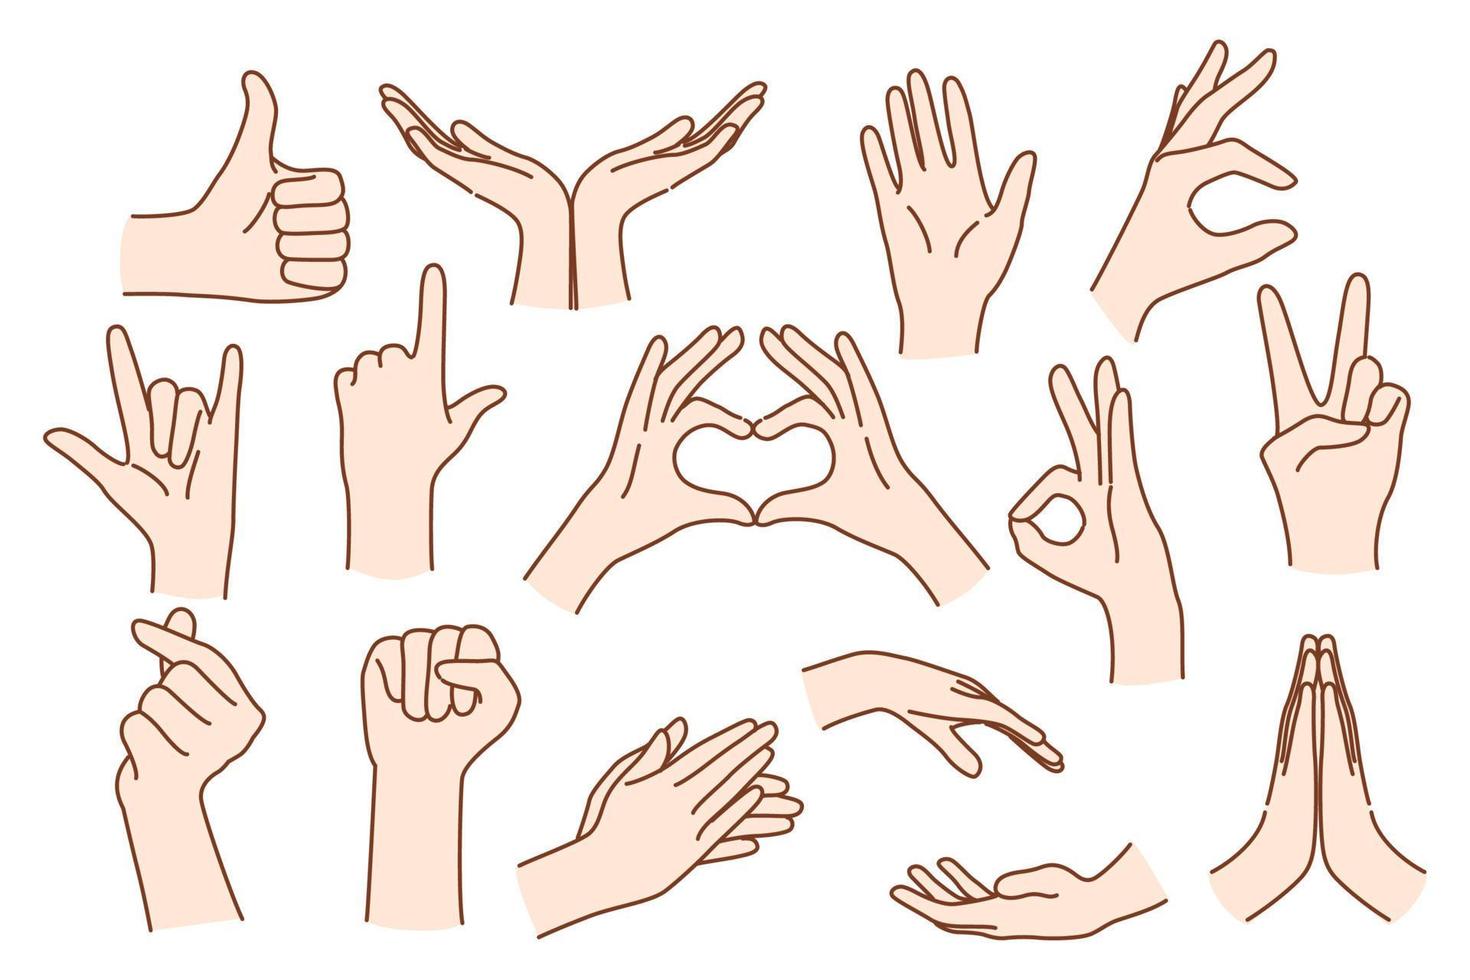 Hand gesture set. human hands showing thumbs up, pointing and